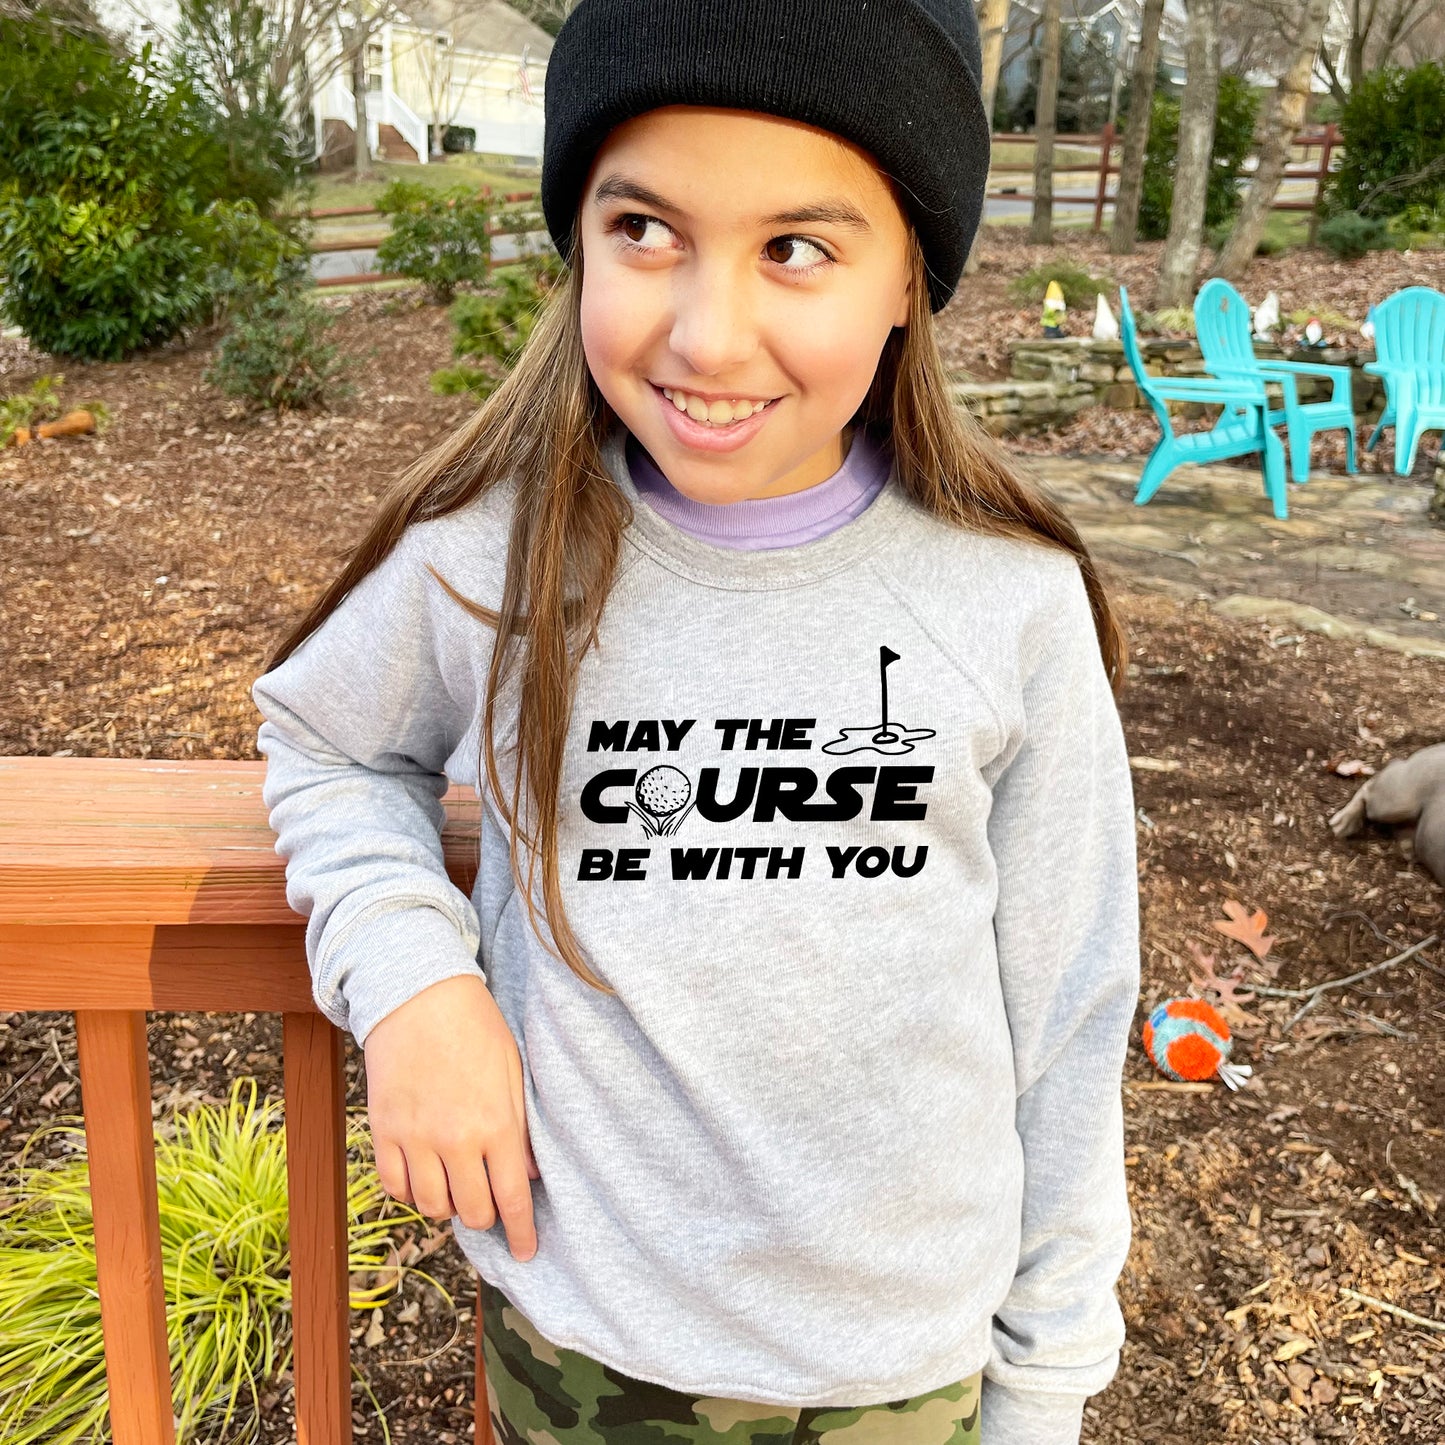 a young girl wearing a gray sweatshirt and a black hat